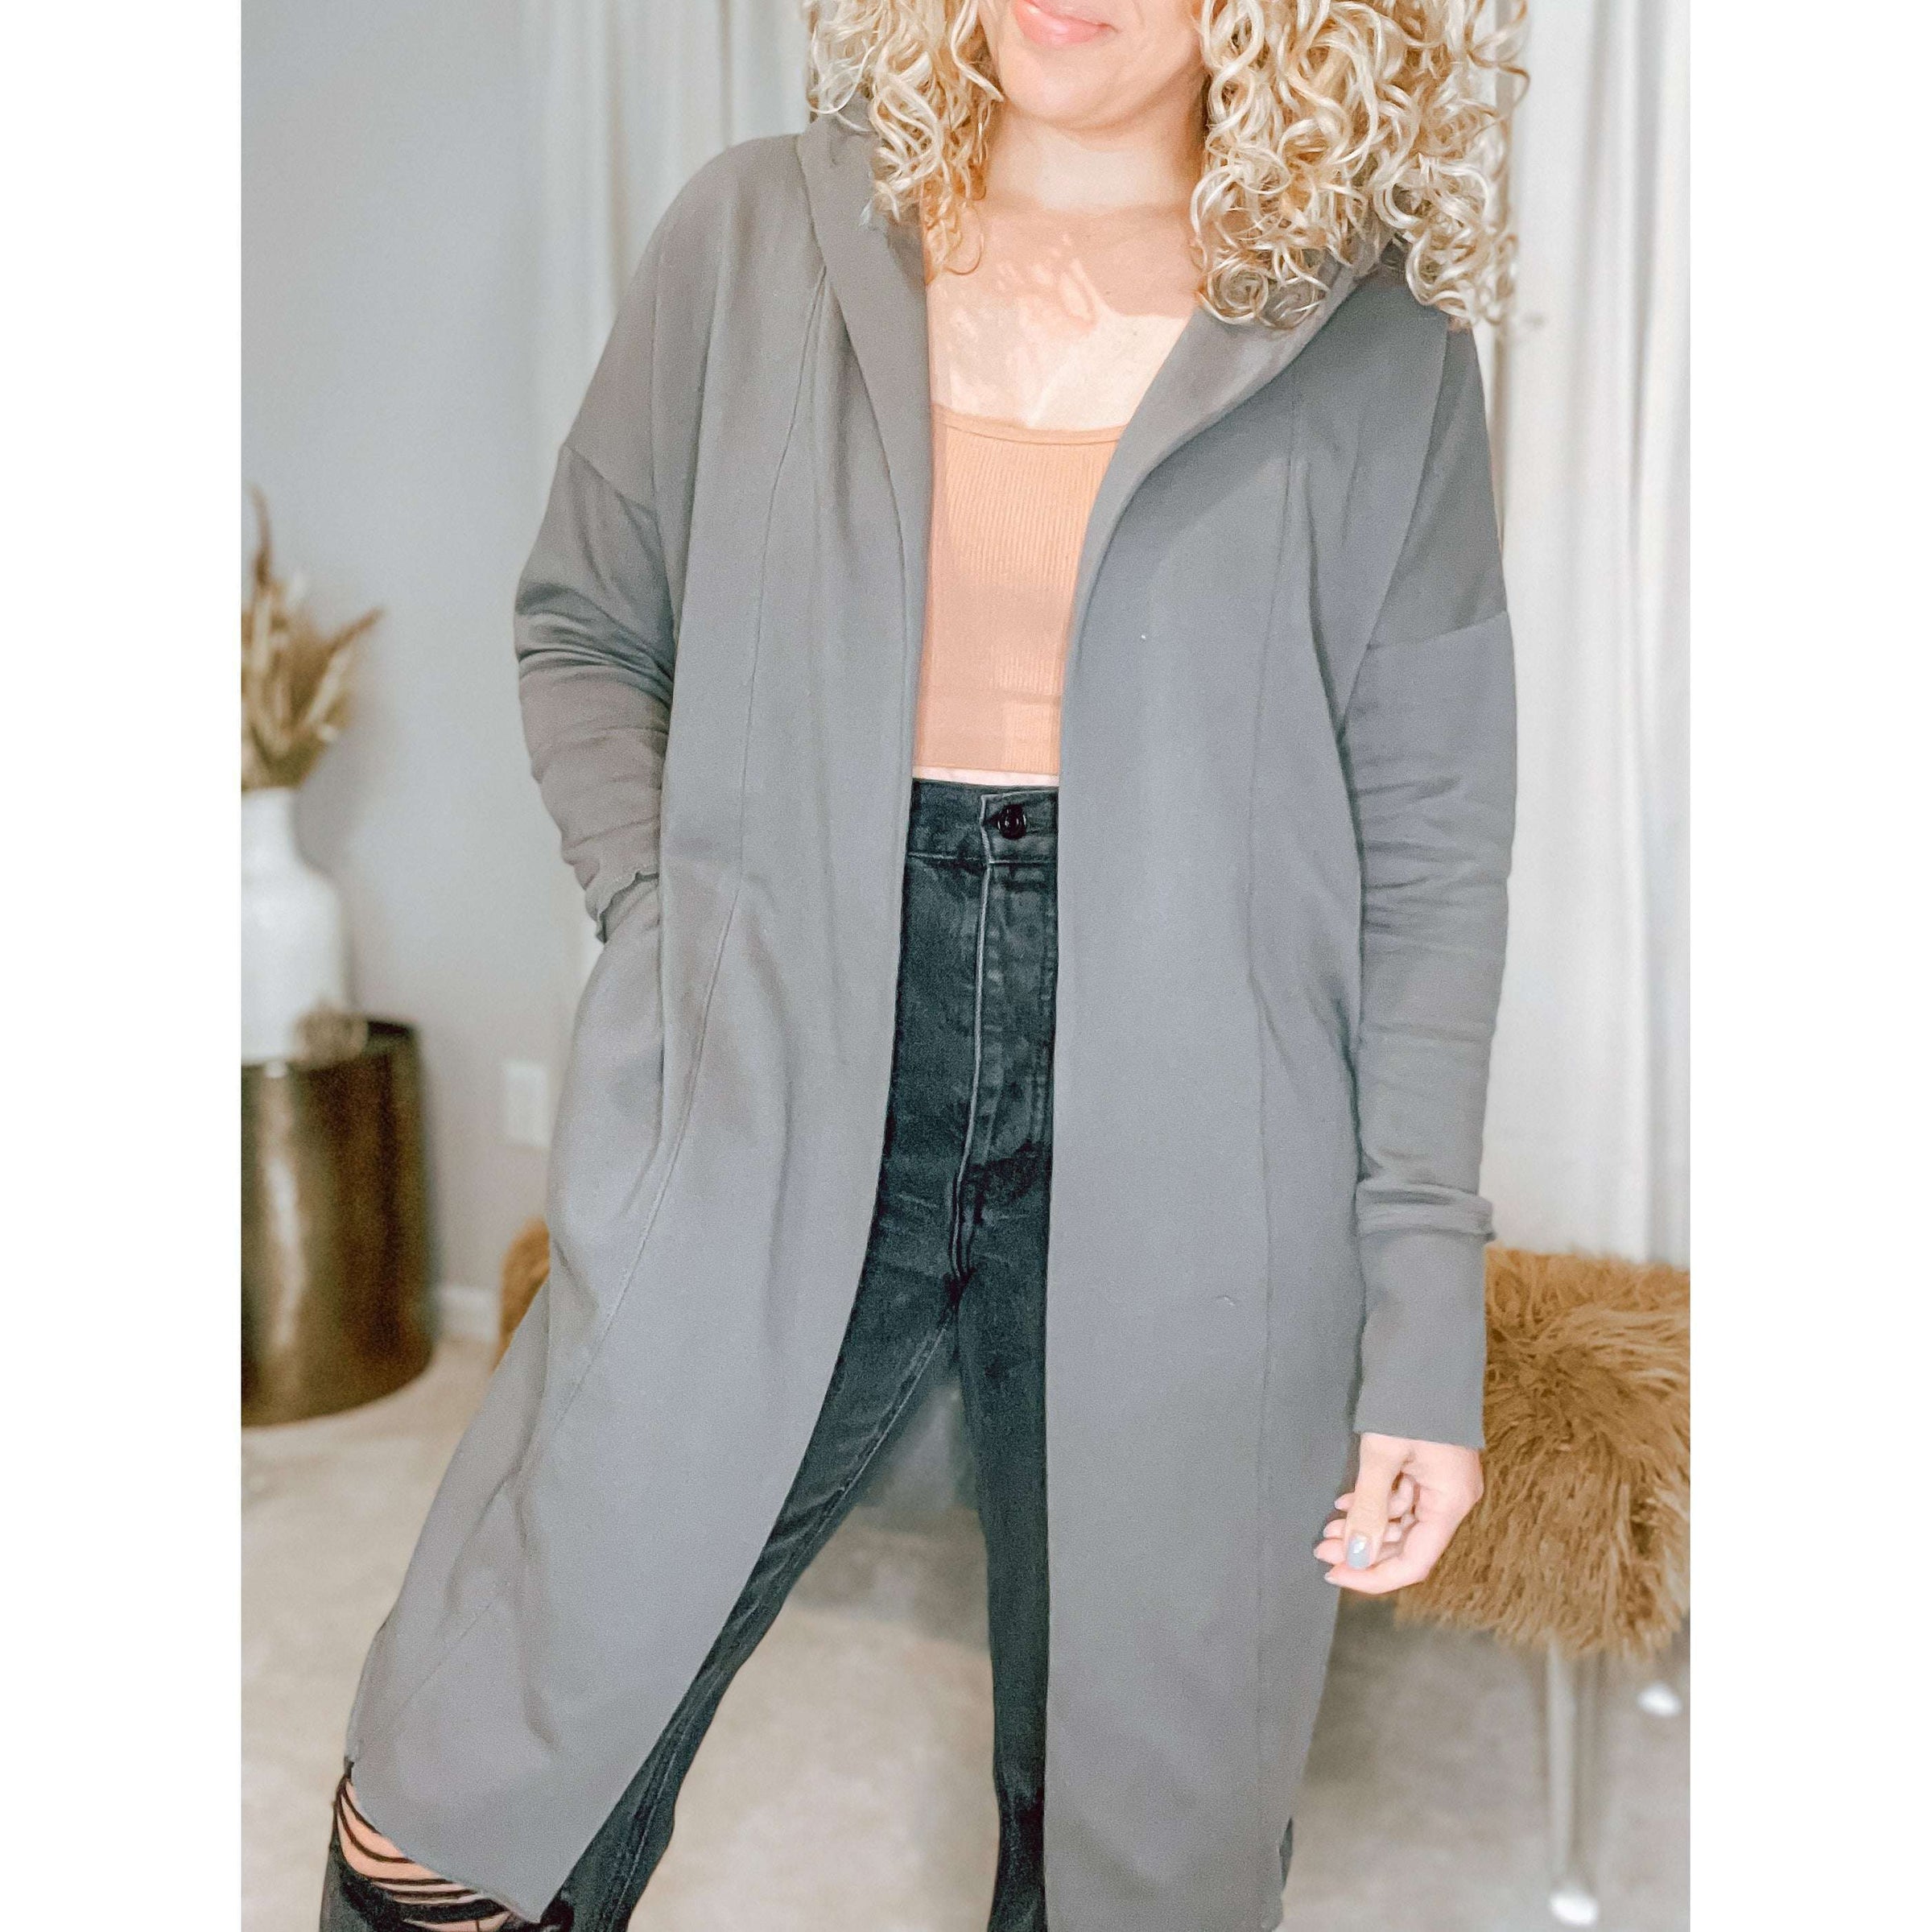 Mona Hooded Cardigan (Charcoal) - The Hive by Chris Jesselle